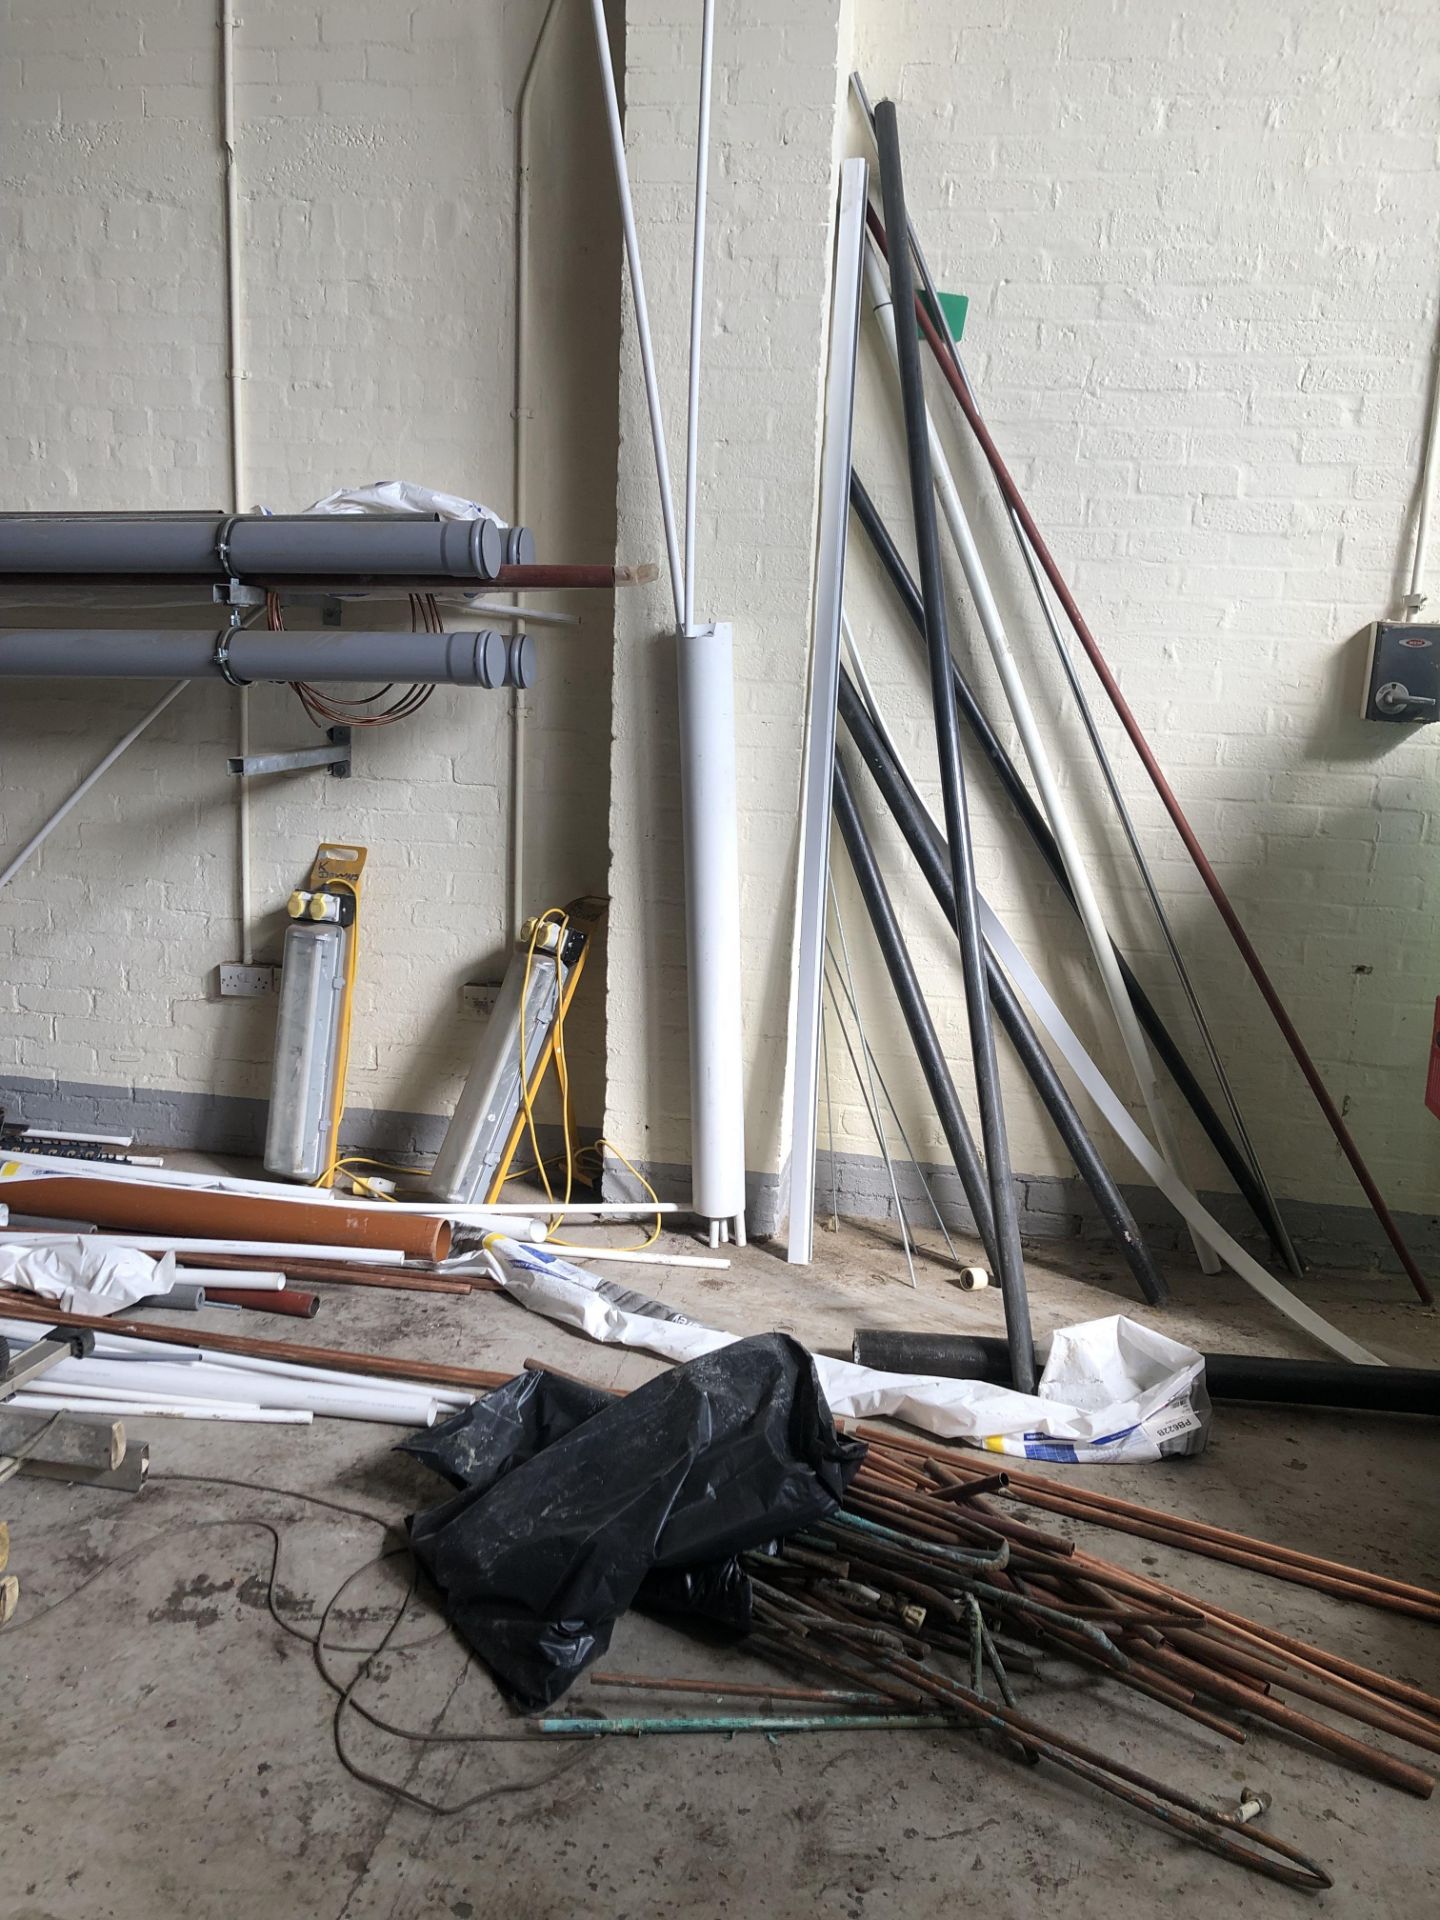 Contents of Plumbers Store - Image 9 of 40